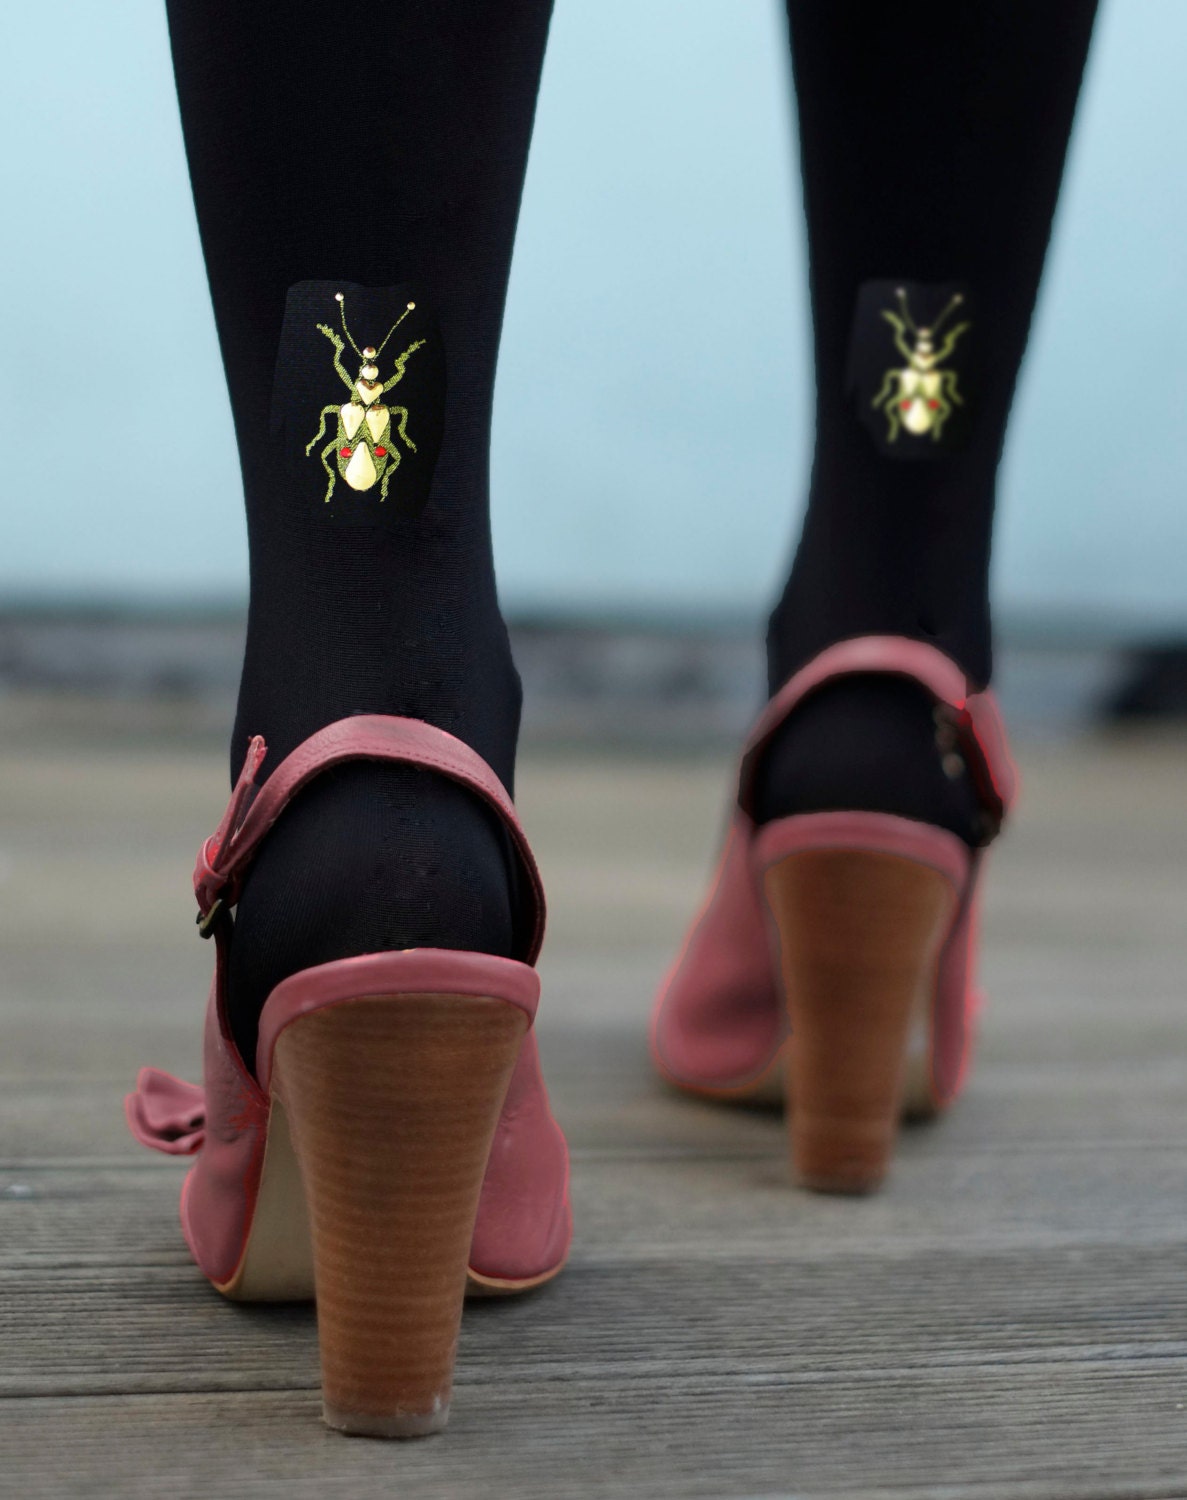 Printed and Studded Insect Tights Gold or Silver